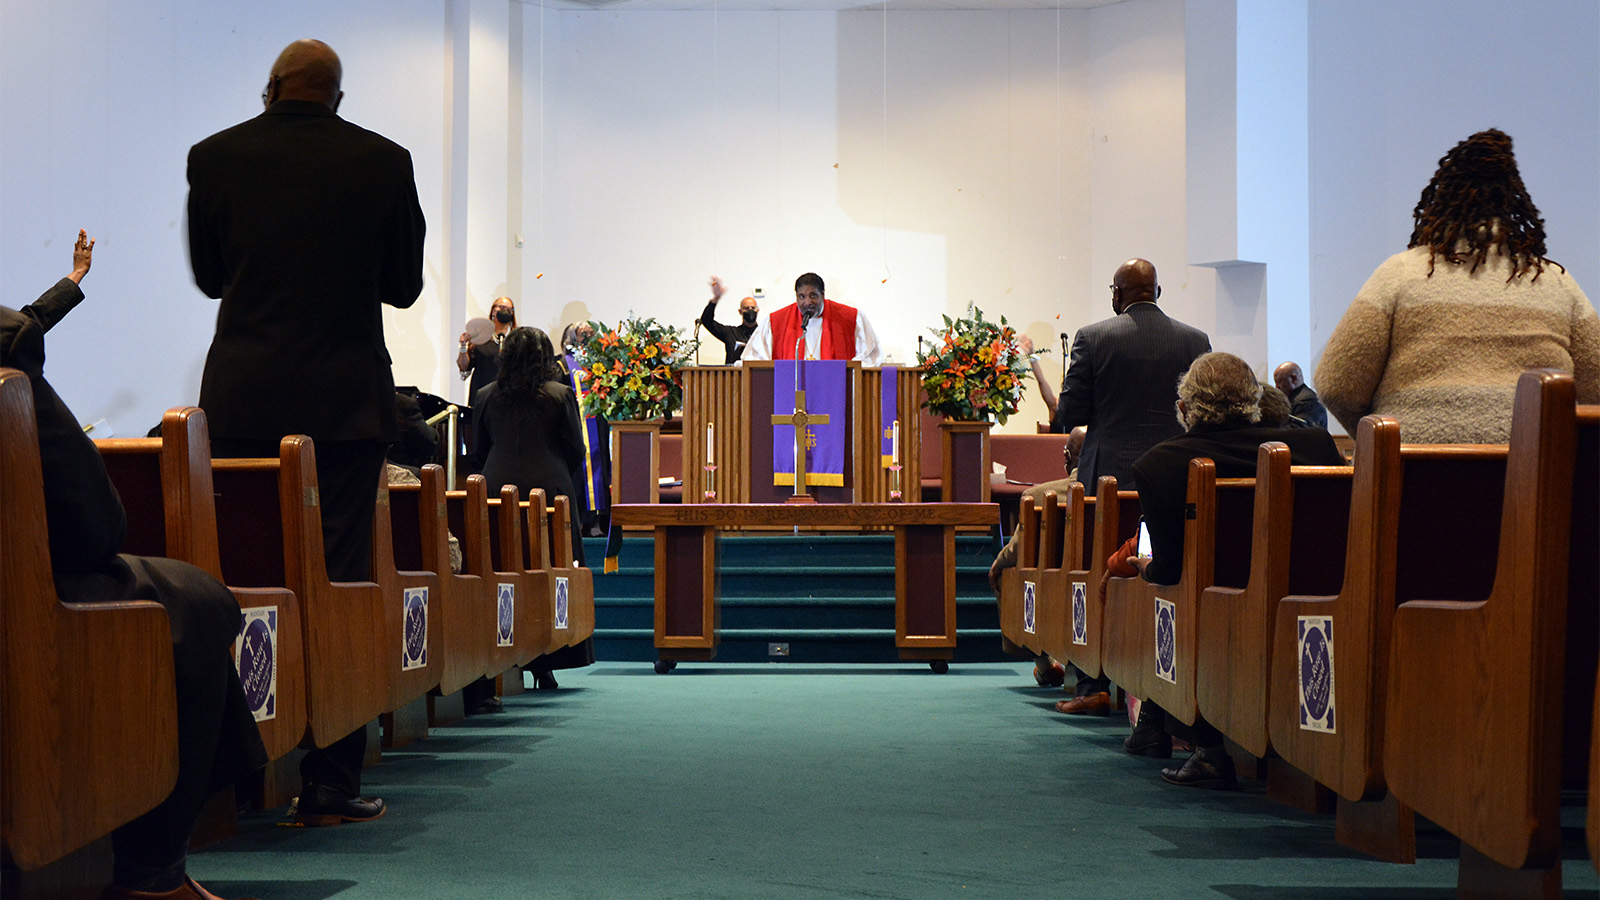 The Rev. William Barber II preaches at Saint James Church in Winston, North Carolina, Sunday, March 27, 2022. RNS photo by Jack Jenkins